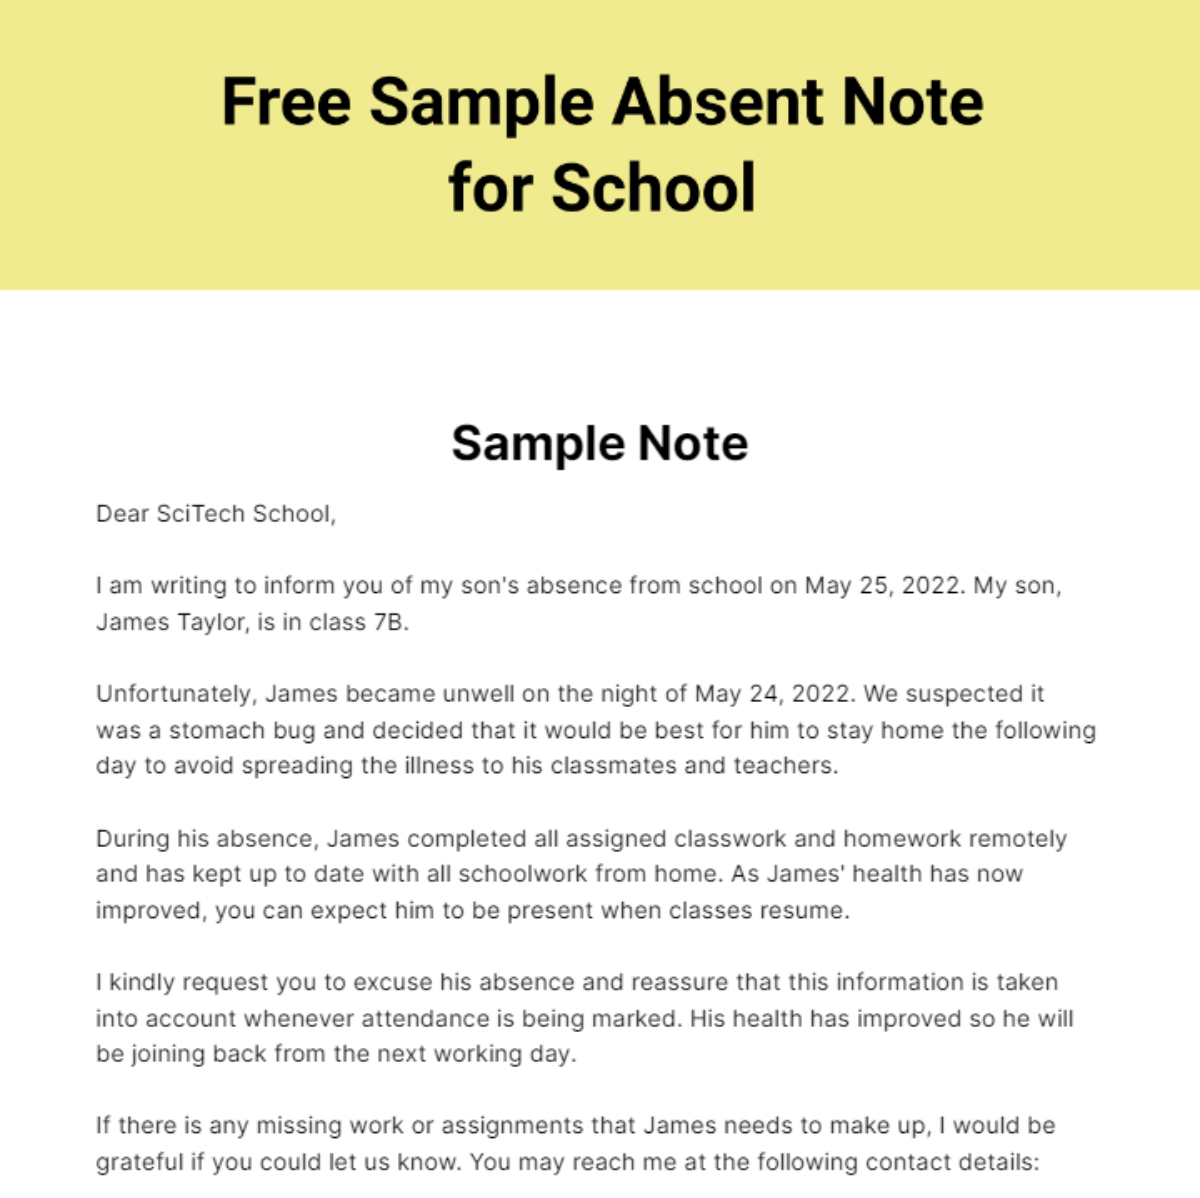 Sample Absent Note for School Template